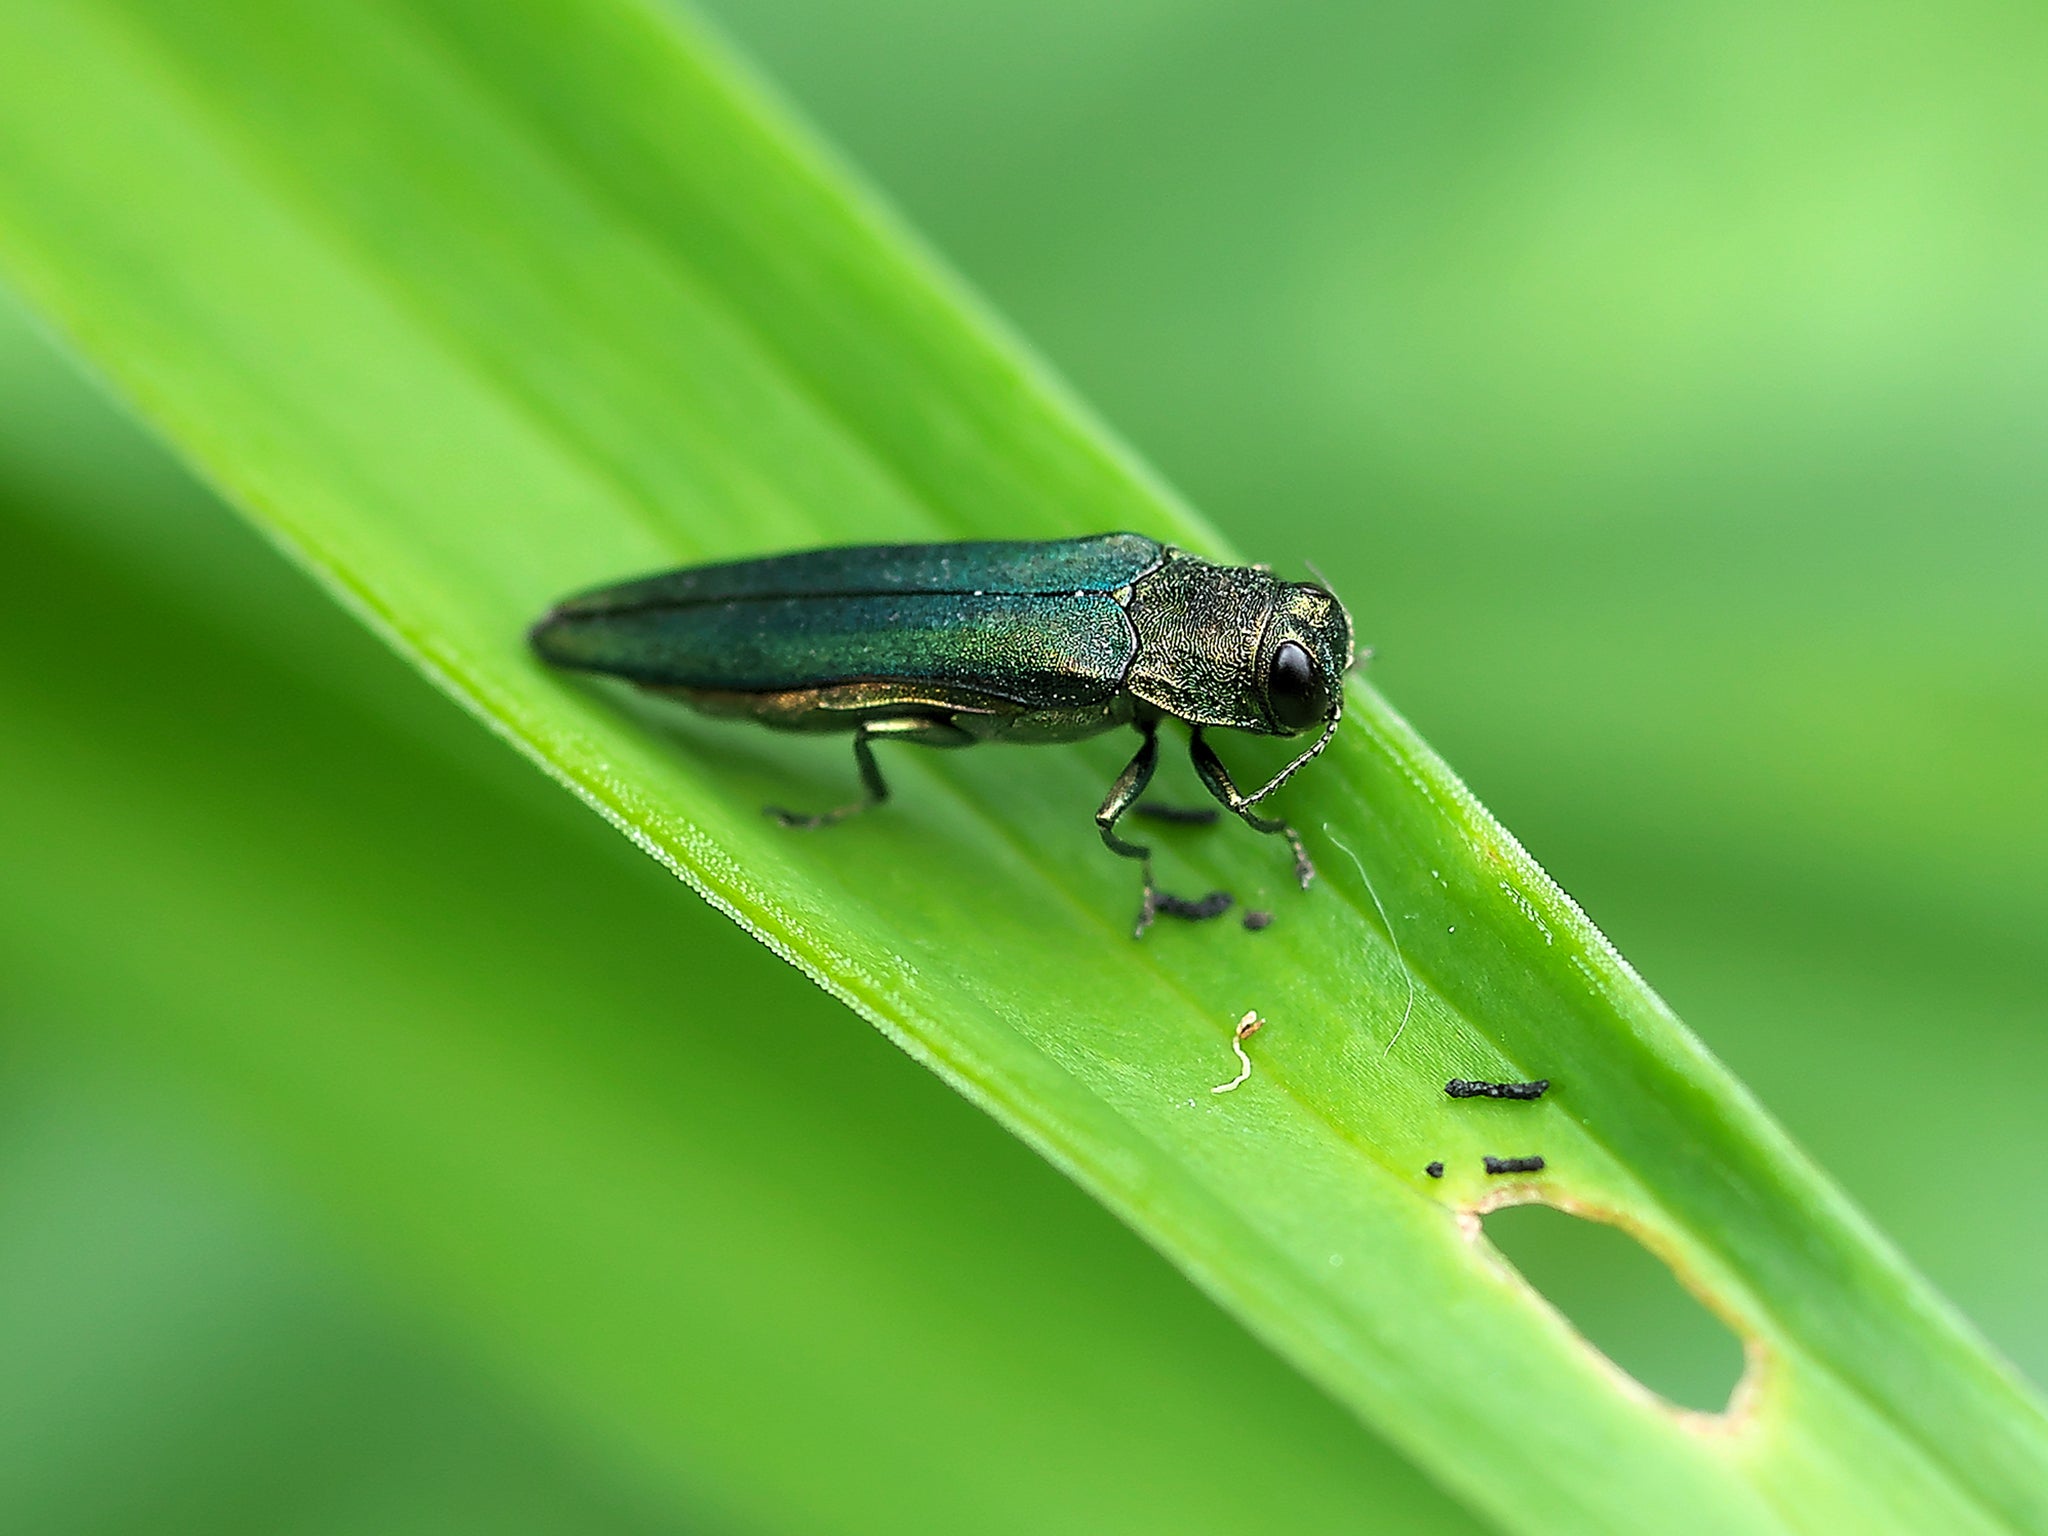 The pesky ash emerald borer, which was accidentally introduced to the US, has already killed millions of trees and Europe is vulnerable, scientists have warned